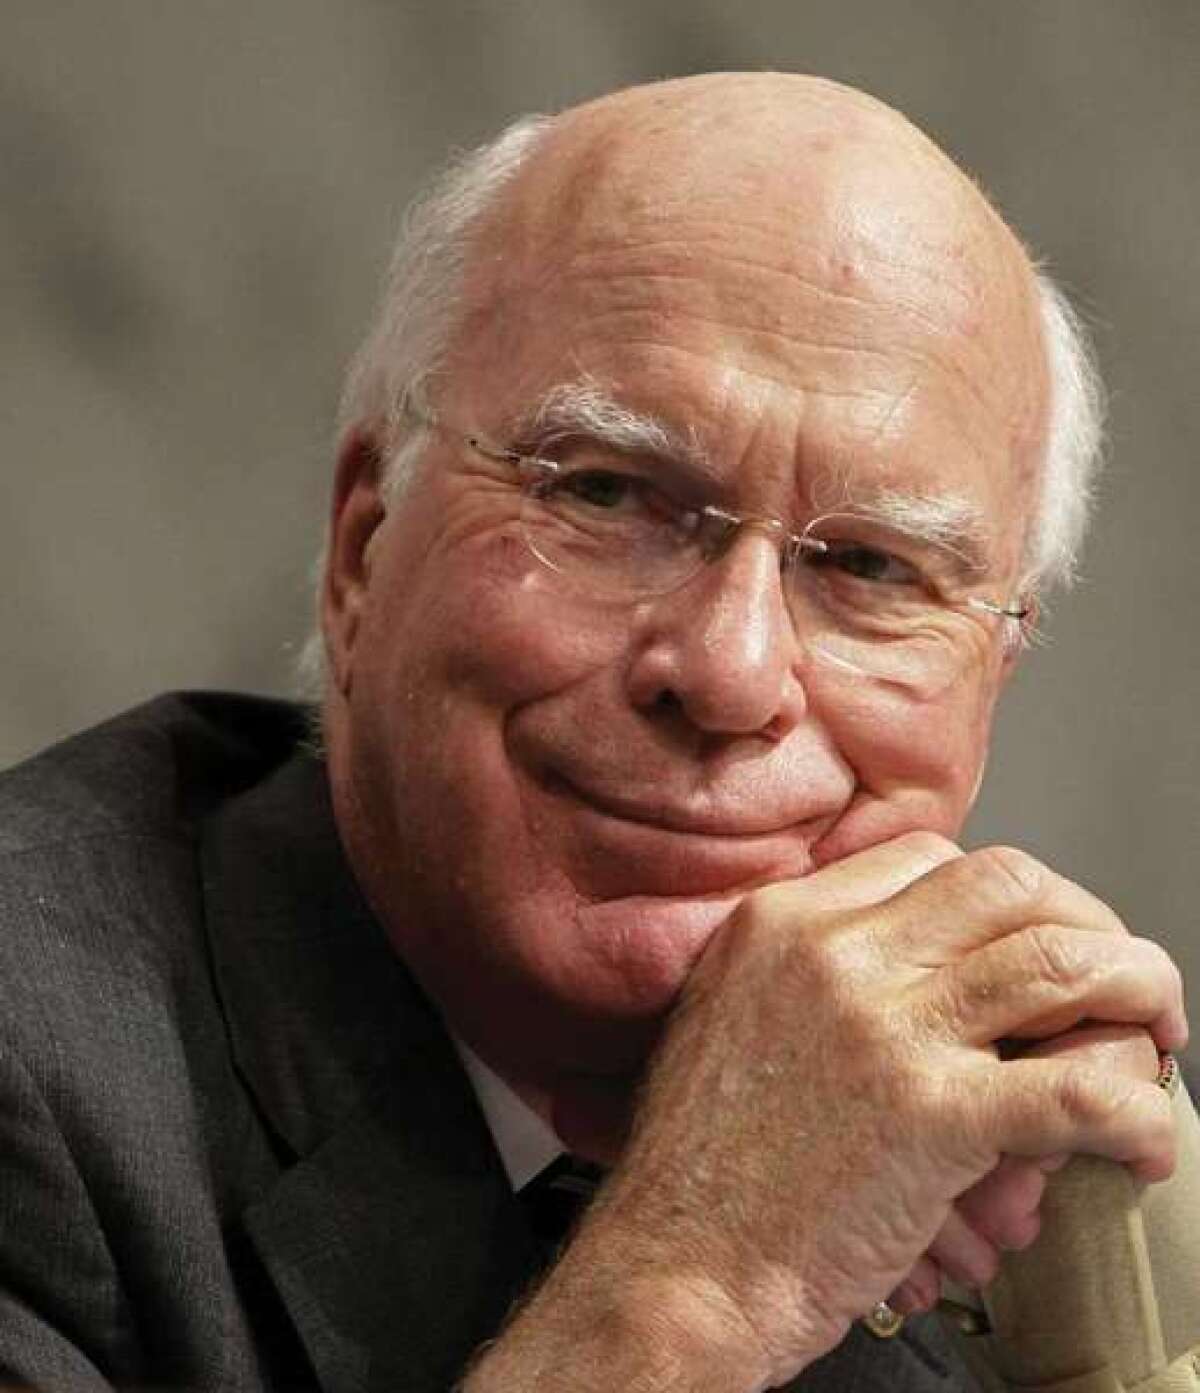 A Senate committee chaired by Sen. Patrick Leahy (D-Vt.) on Thursday unanimously backed privacy protections that would require the government for the first time to obtain a warrant from a judge, not just a subpoena, before gaining access to e-mail and other electronic communications.